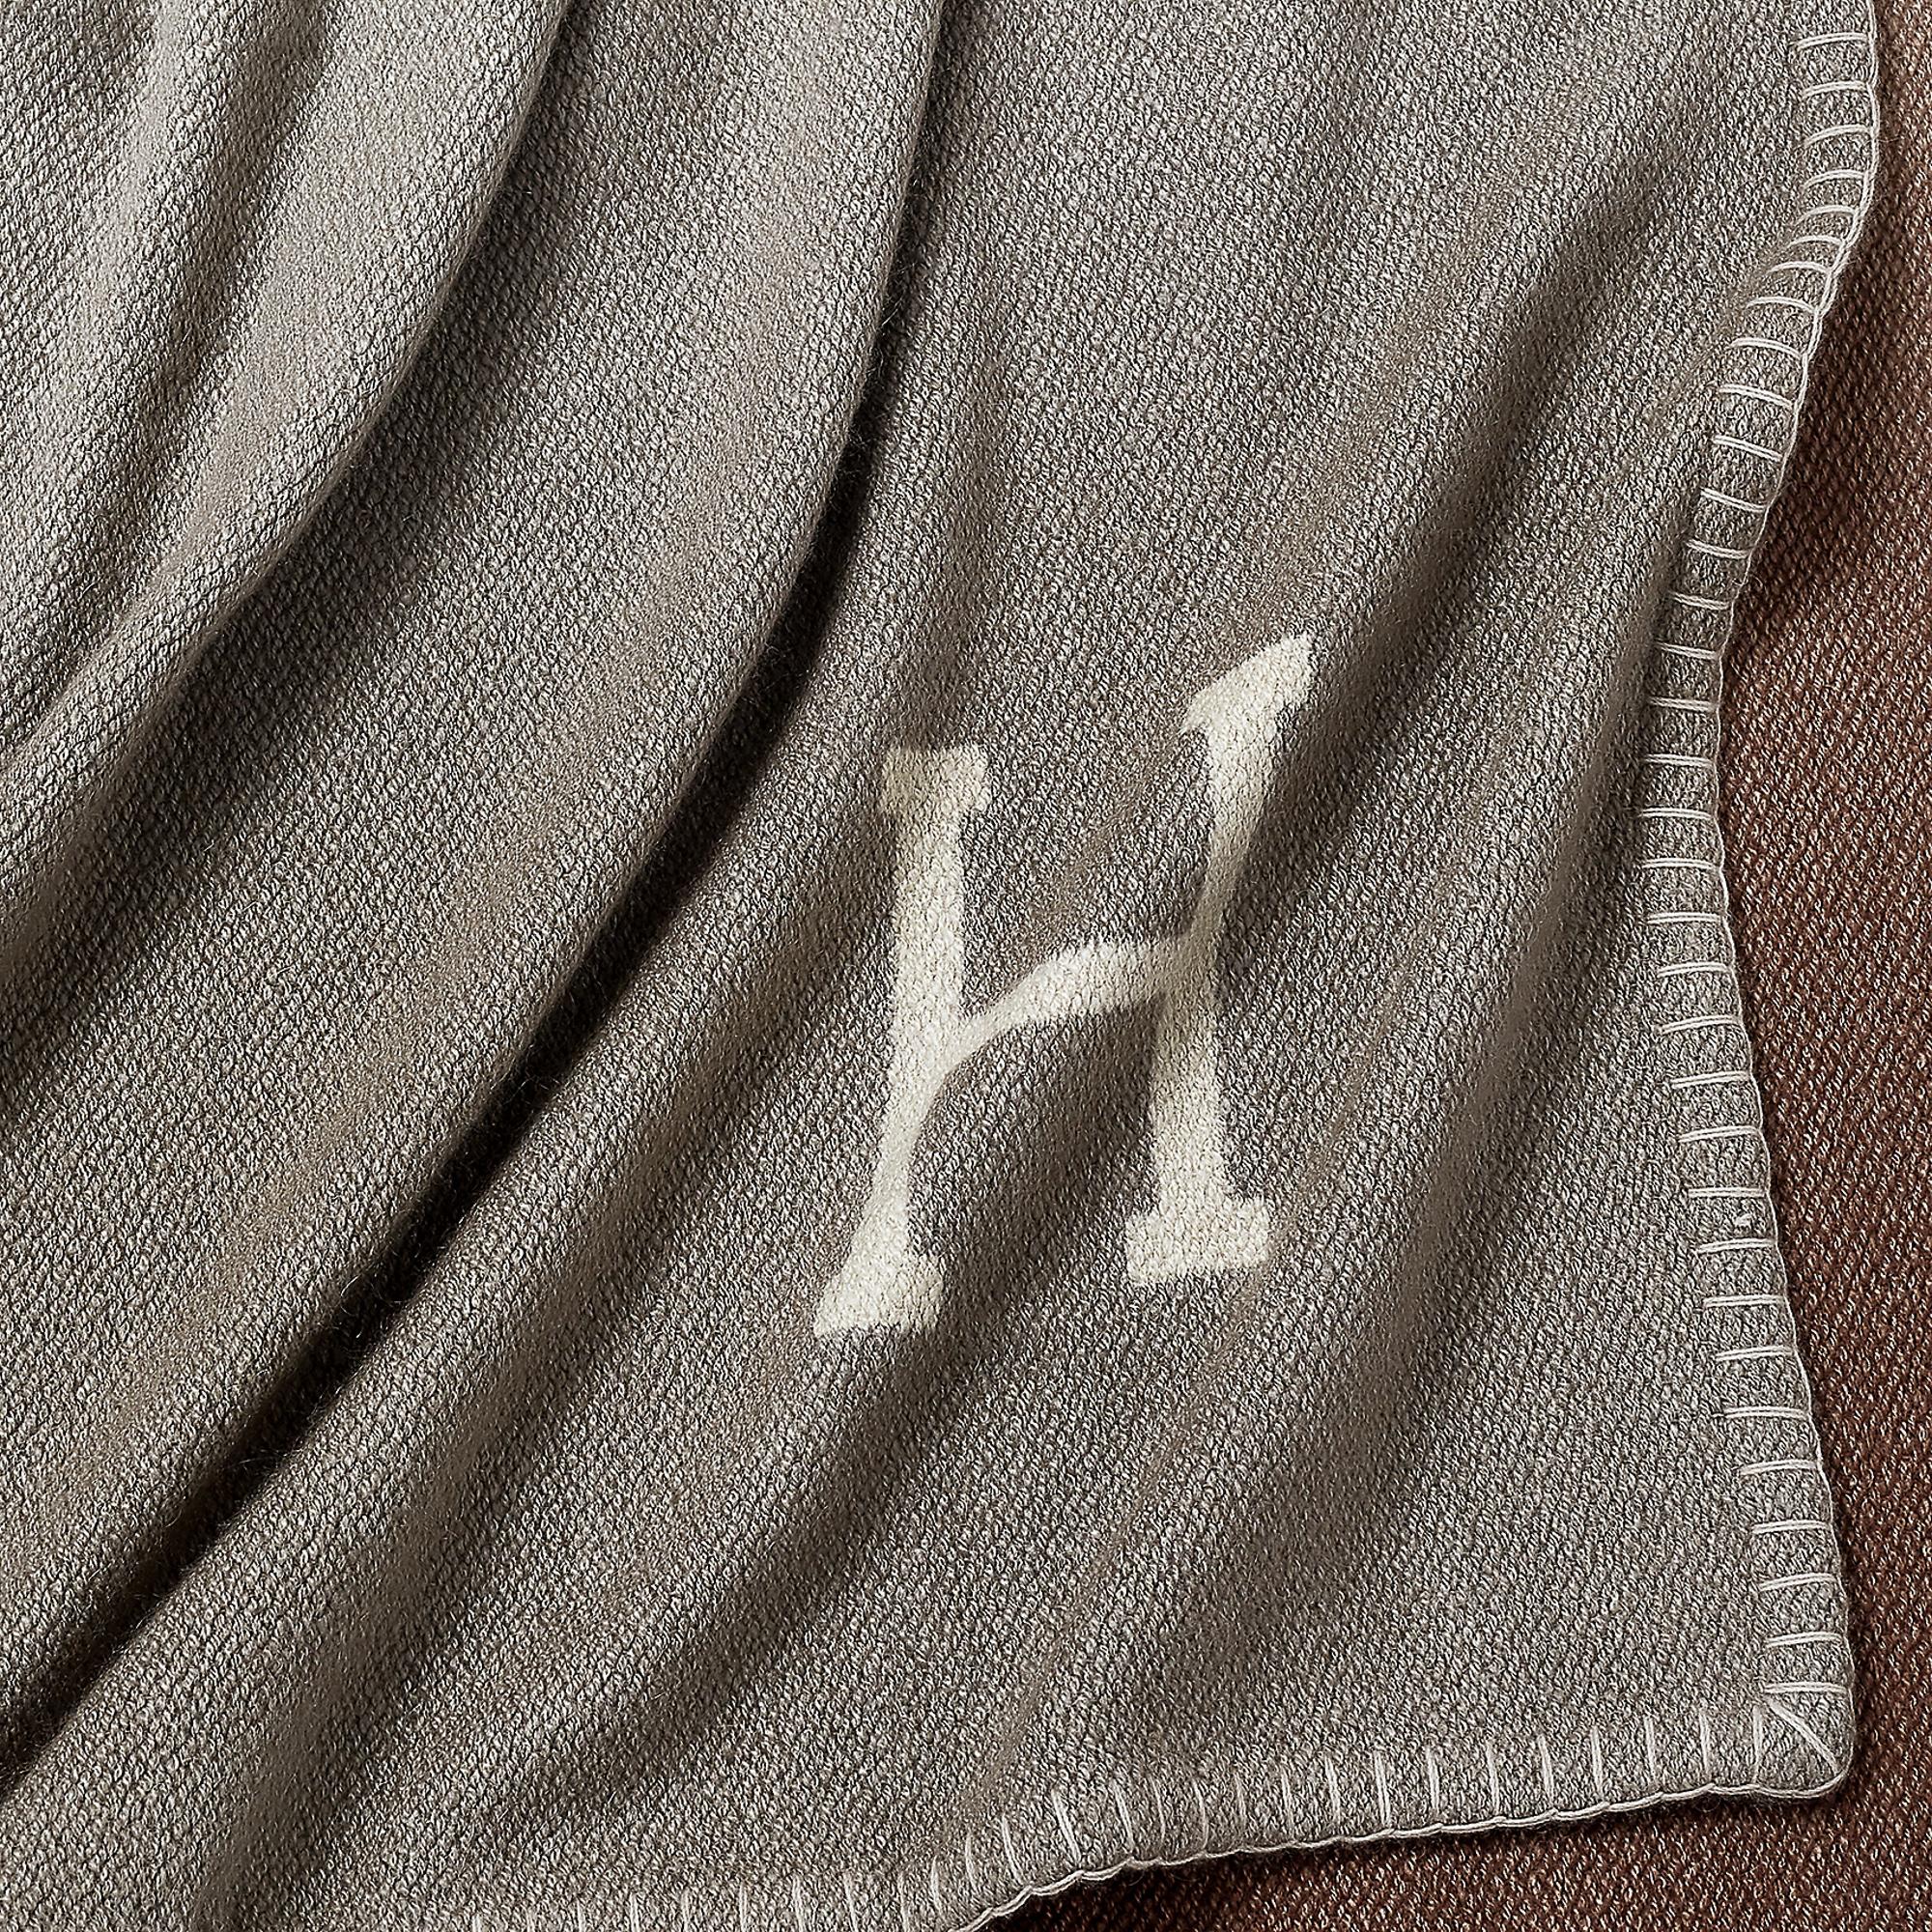 Hermes Yack 'n' Dye Ombre Blanket Naturel New In New Condition For Sale In Miami, FL